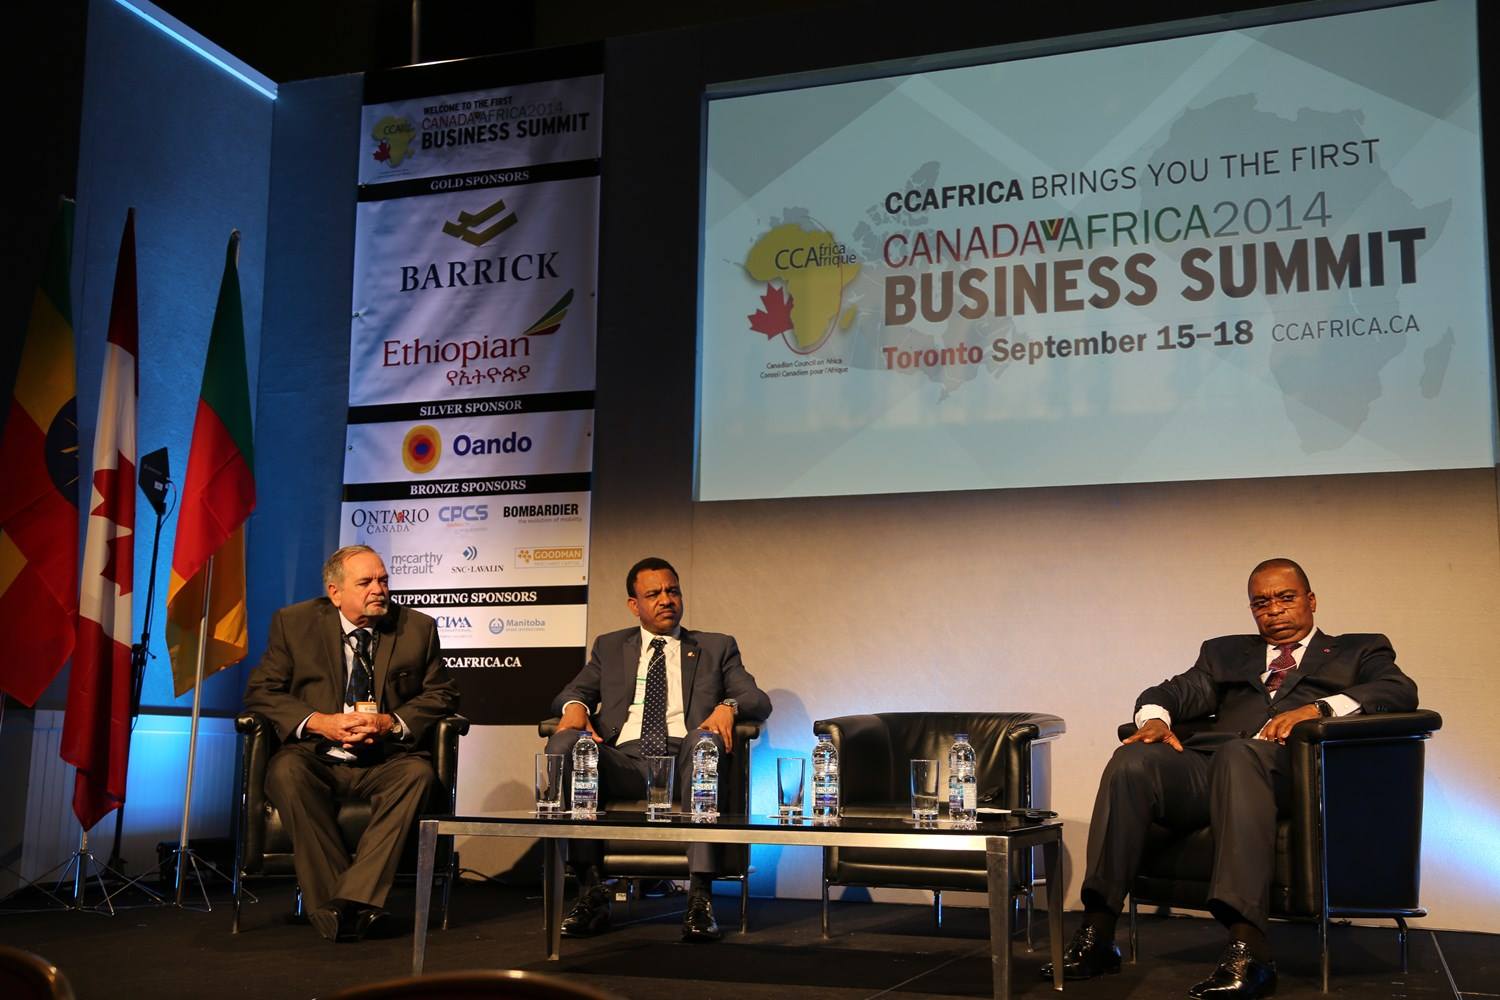 Ethiopia attended the first Canada-Africa Business Summit